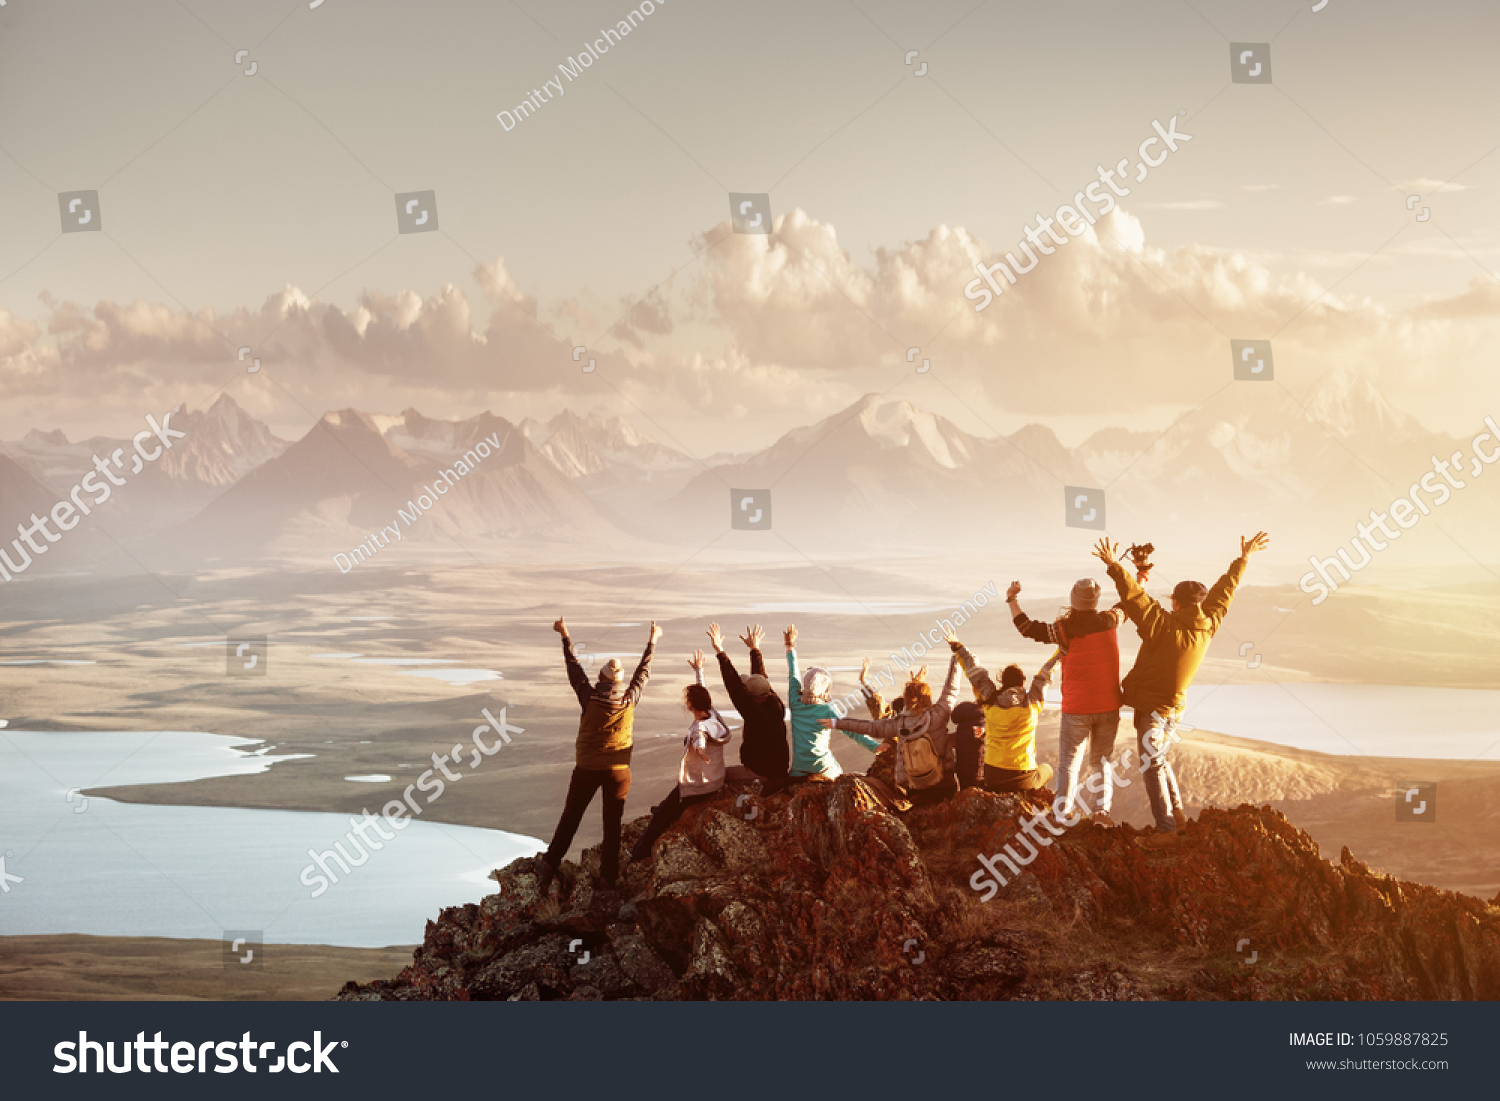 Big group of people having fun in success pose with raised arms on mountain top against sunset lakes and mountains. Travel, adventure or expedition concept